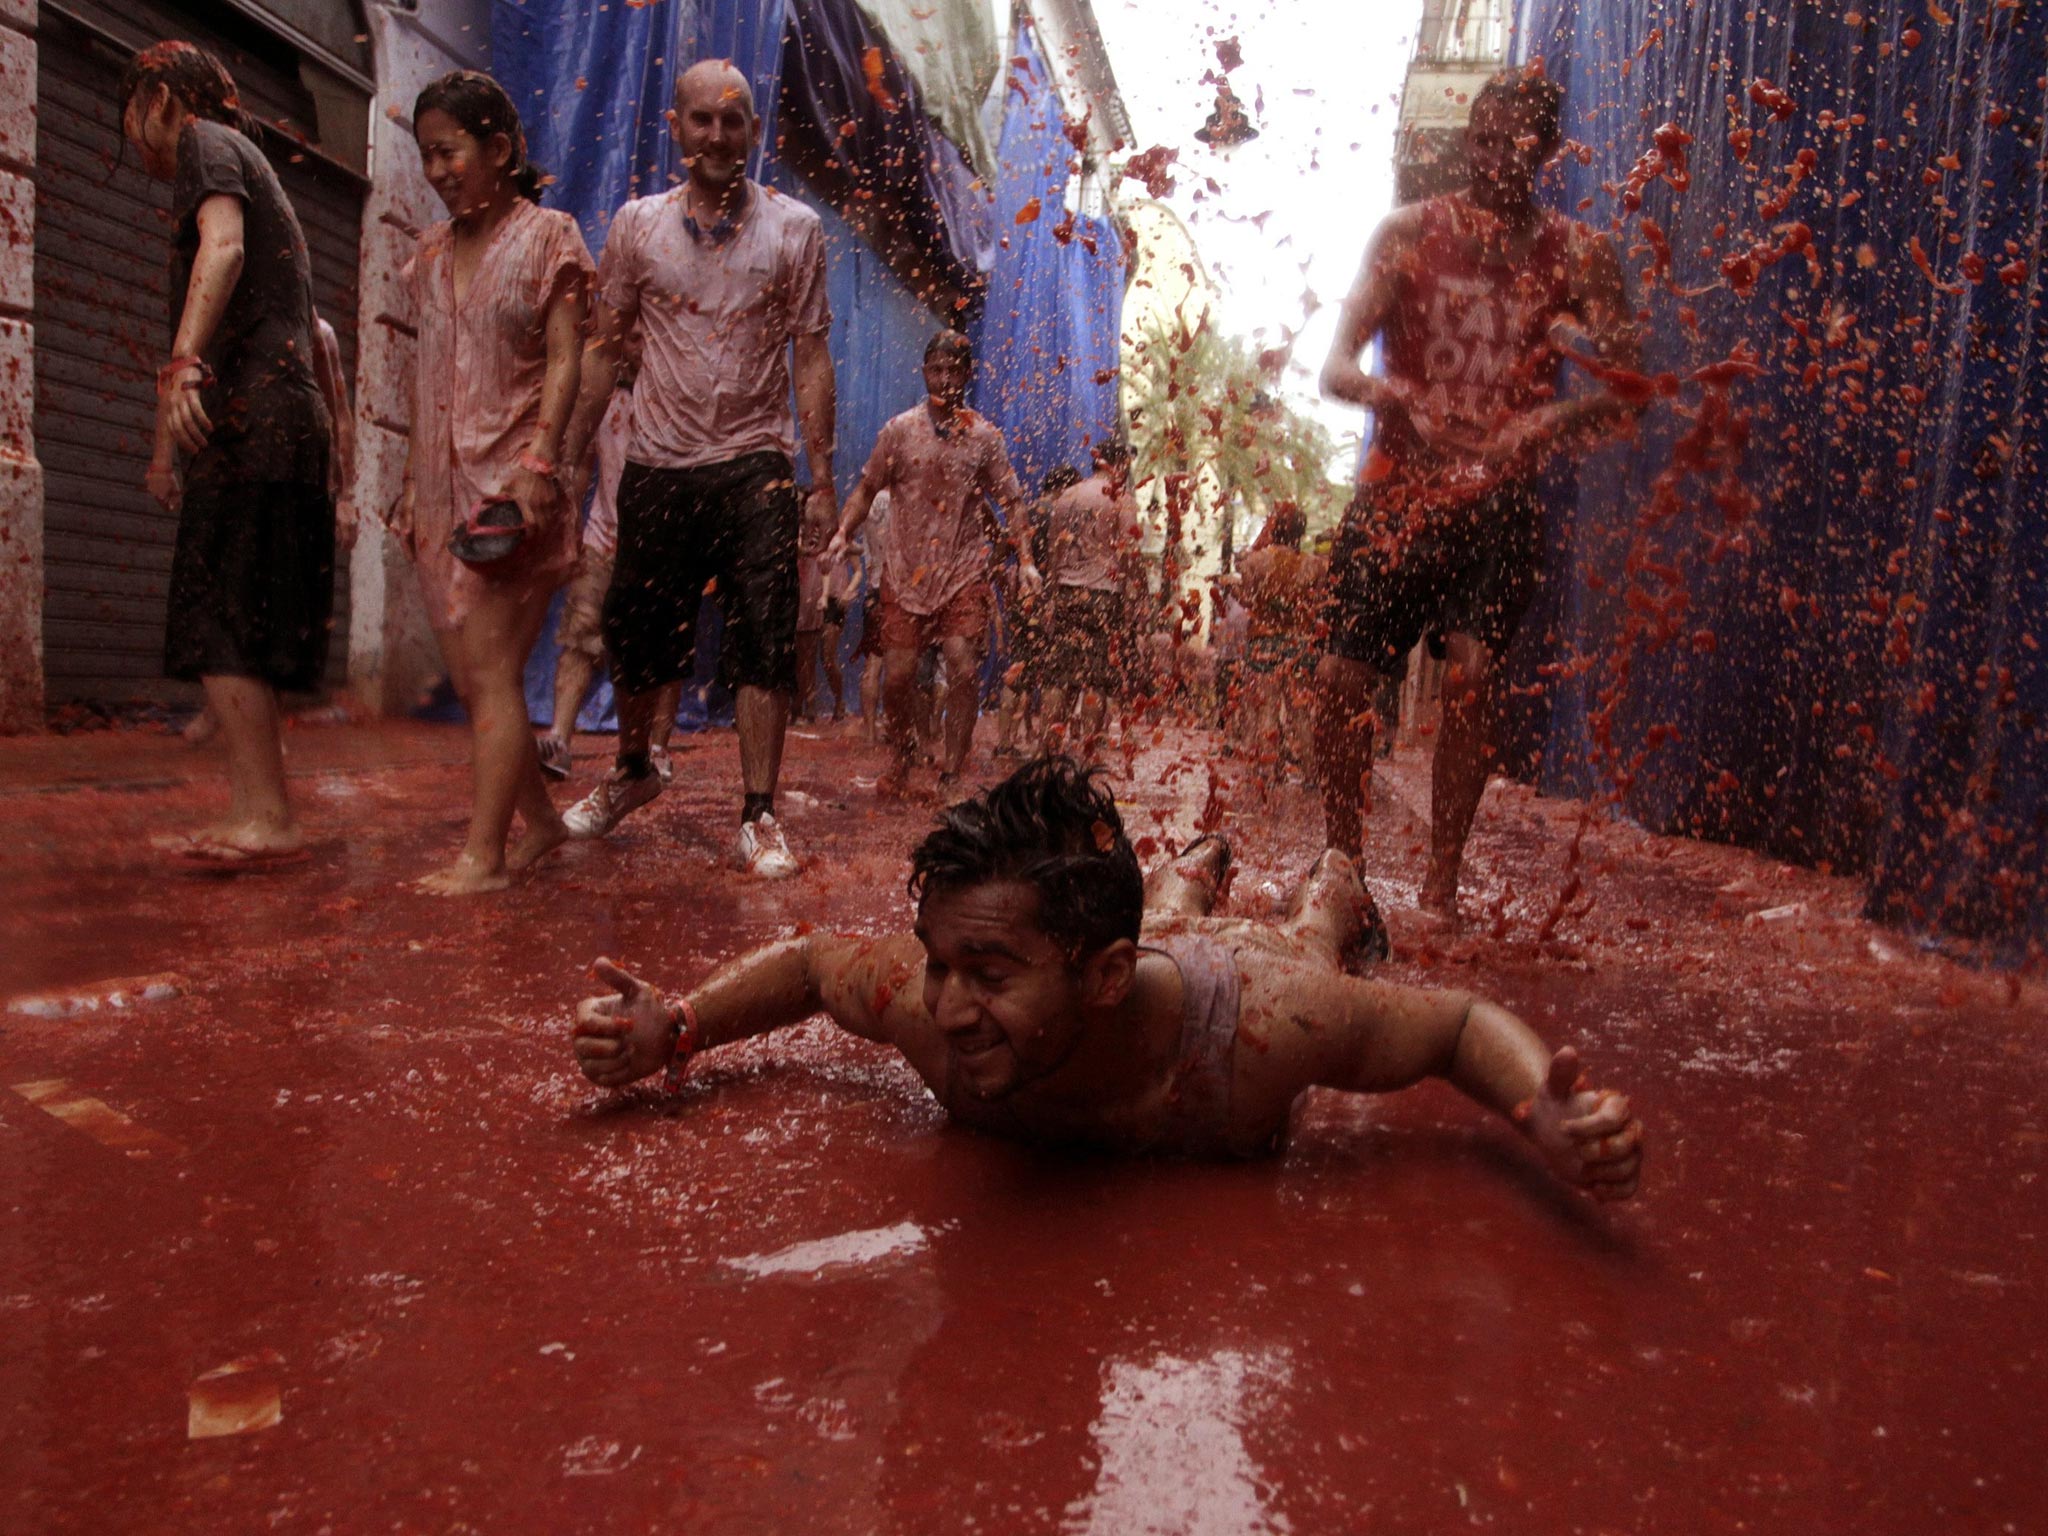 A reveller plays in tomato pulp after the annual "Tomatina" (tomato fight) in the Mediterranean village of Bunol, near Valencia